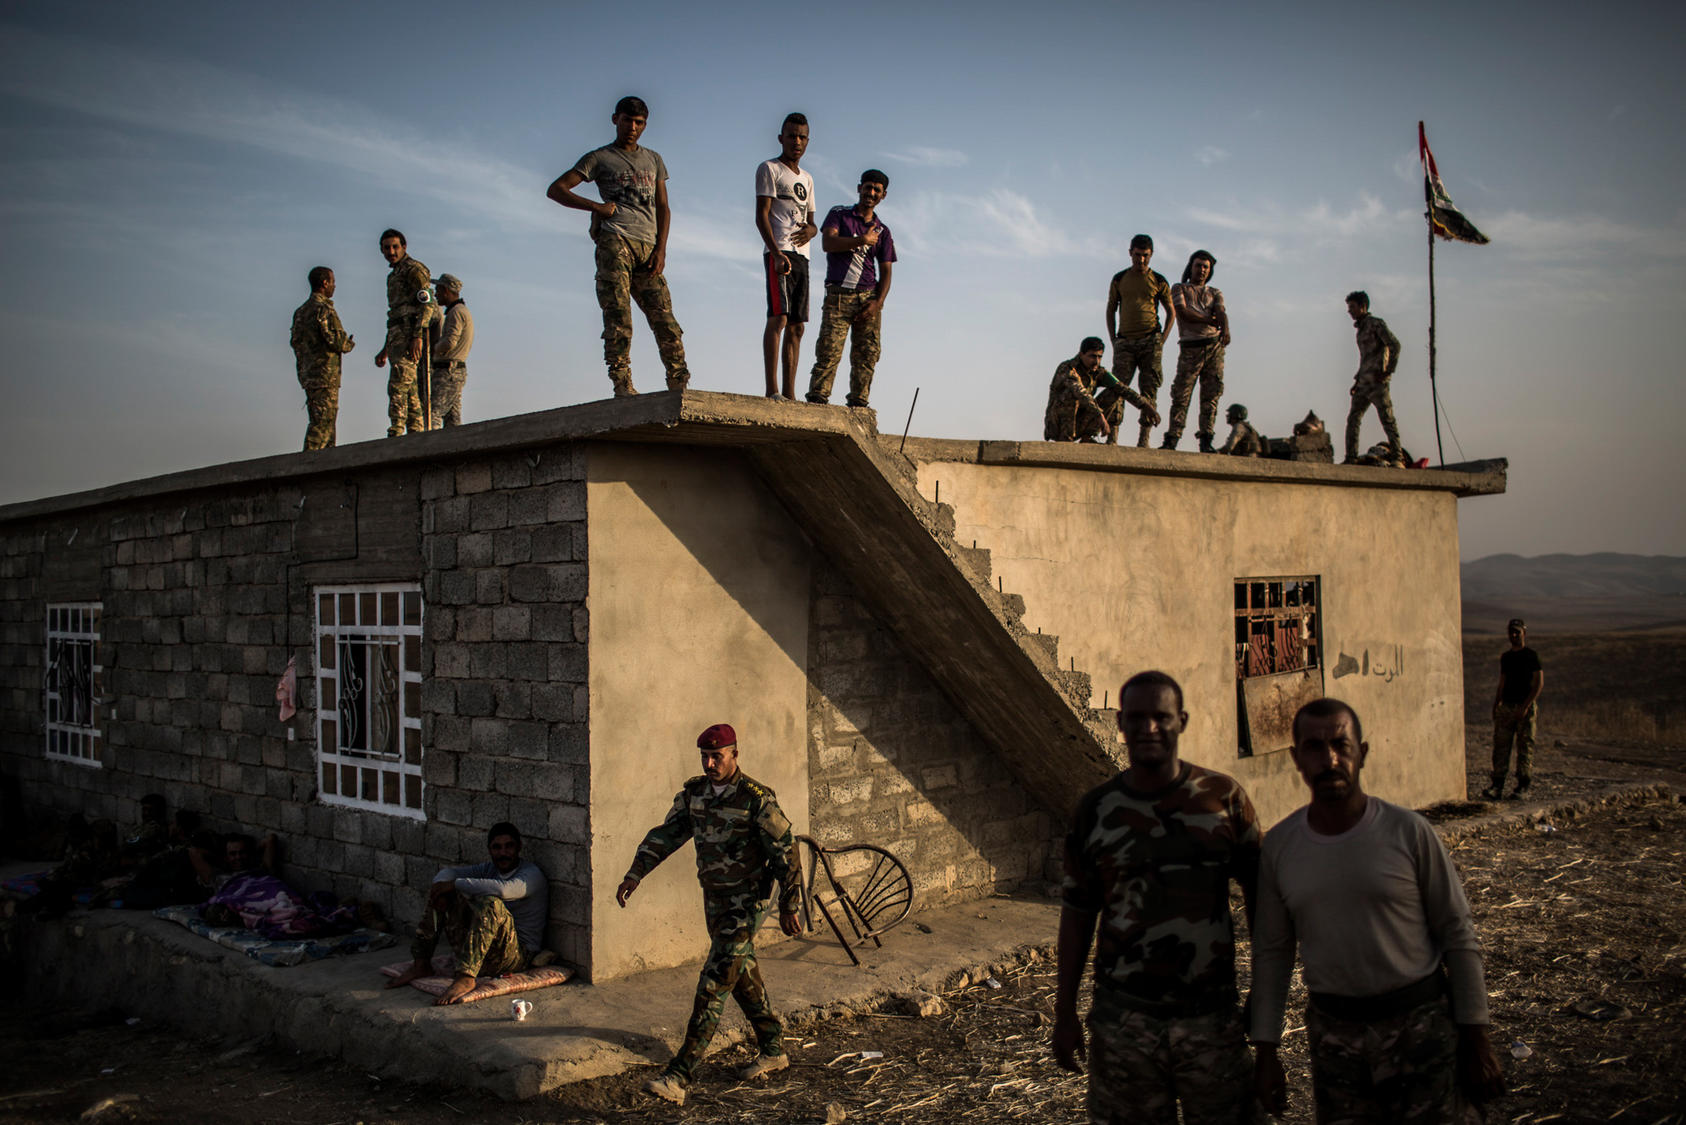 Sunni Arab fighters, many of whom fled Mosul when the Islamic State group captured the city two years ago, wait at their base near the Mosul Dam Oct. 18, 2016. Photo Courtesy of The New York Times/Bryan Denton